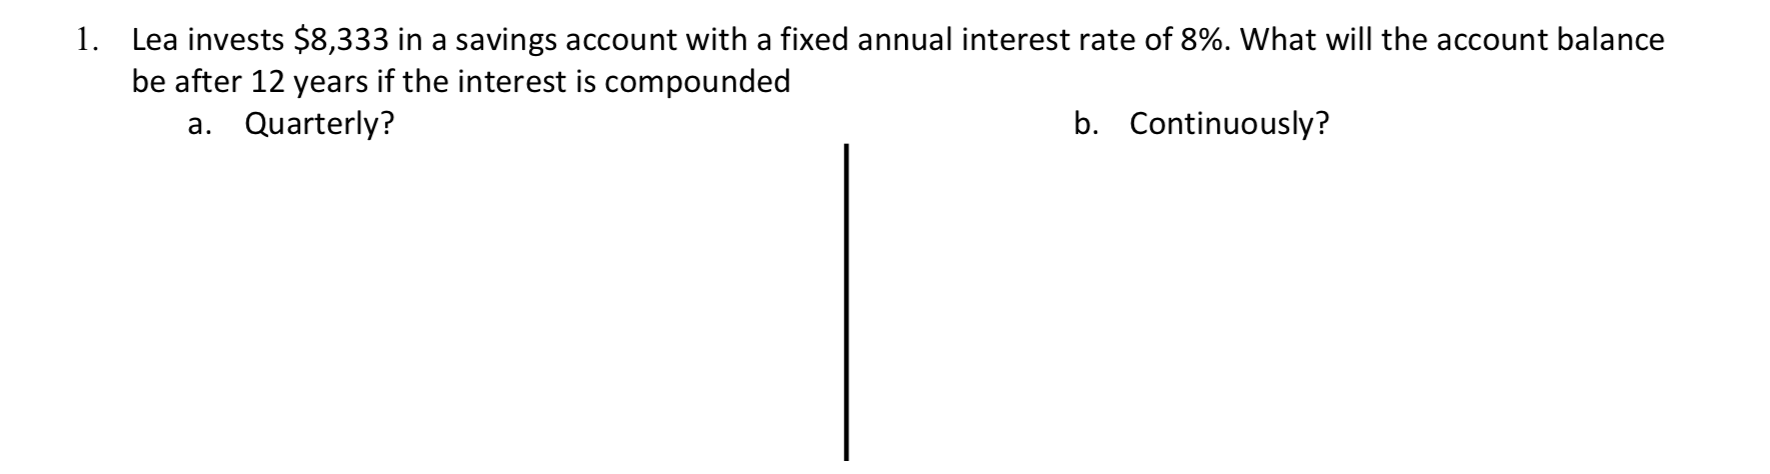 Lea invests $8,333 in a savings account with a fixed annual interest rate of 8%. What will the account balance
be after 12 years if the interest is compounded
a. Quarterly?
1.
b. Continuously?
